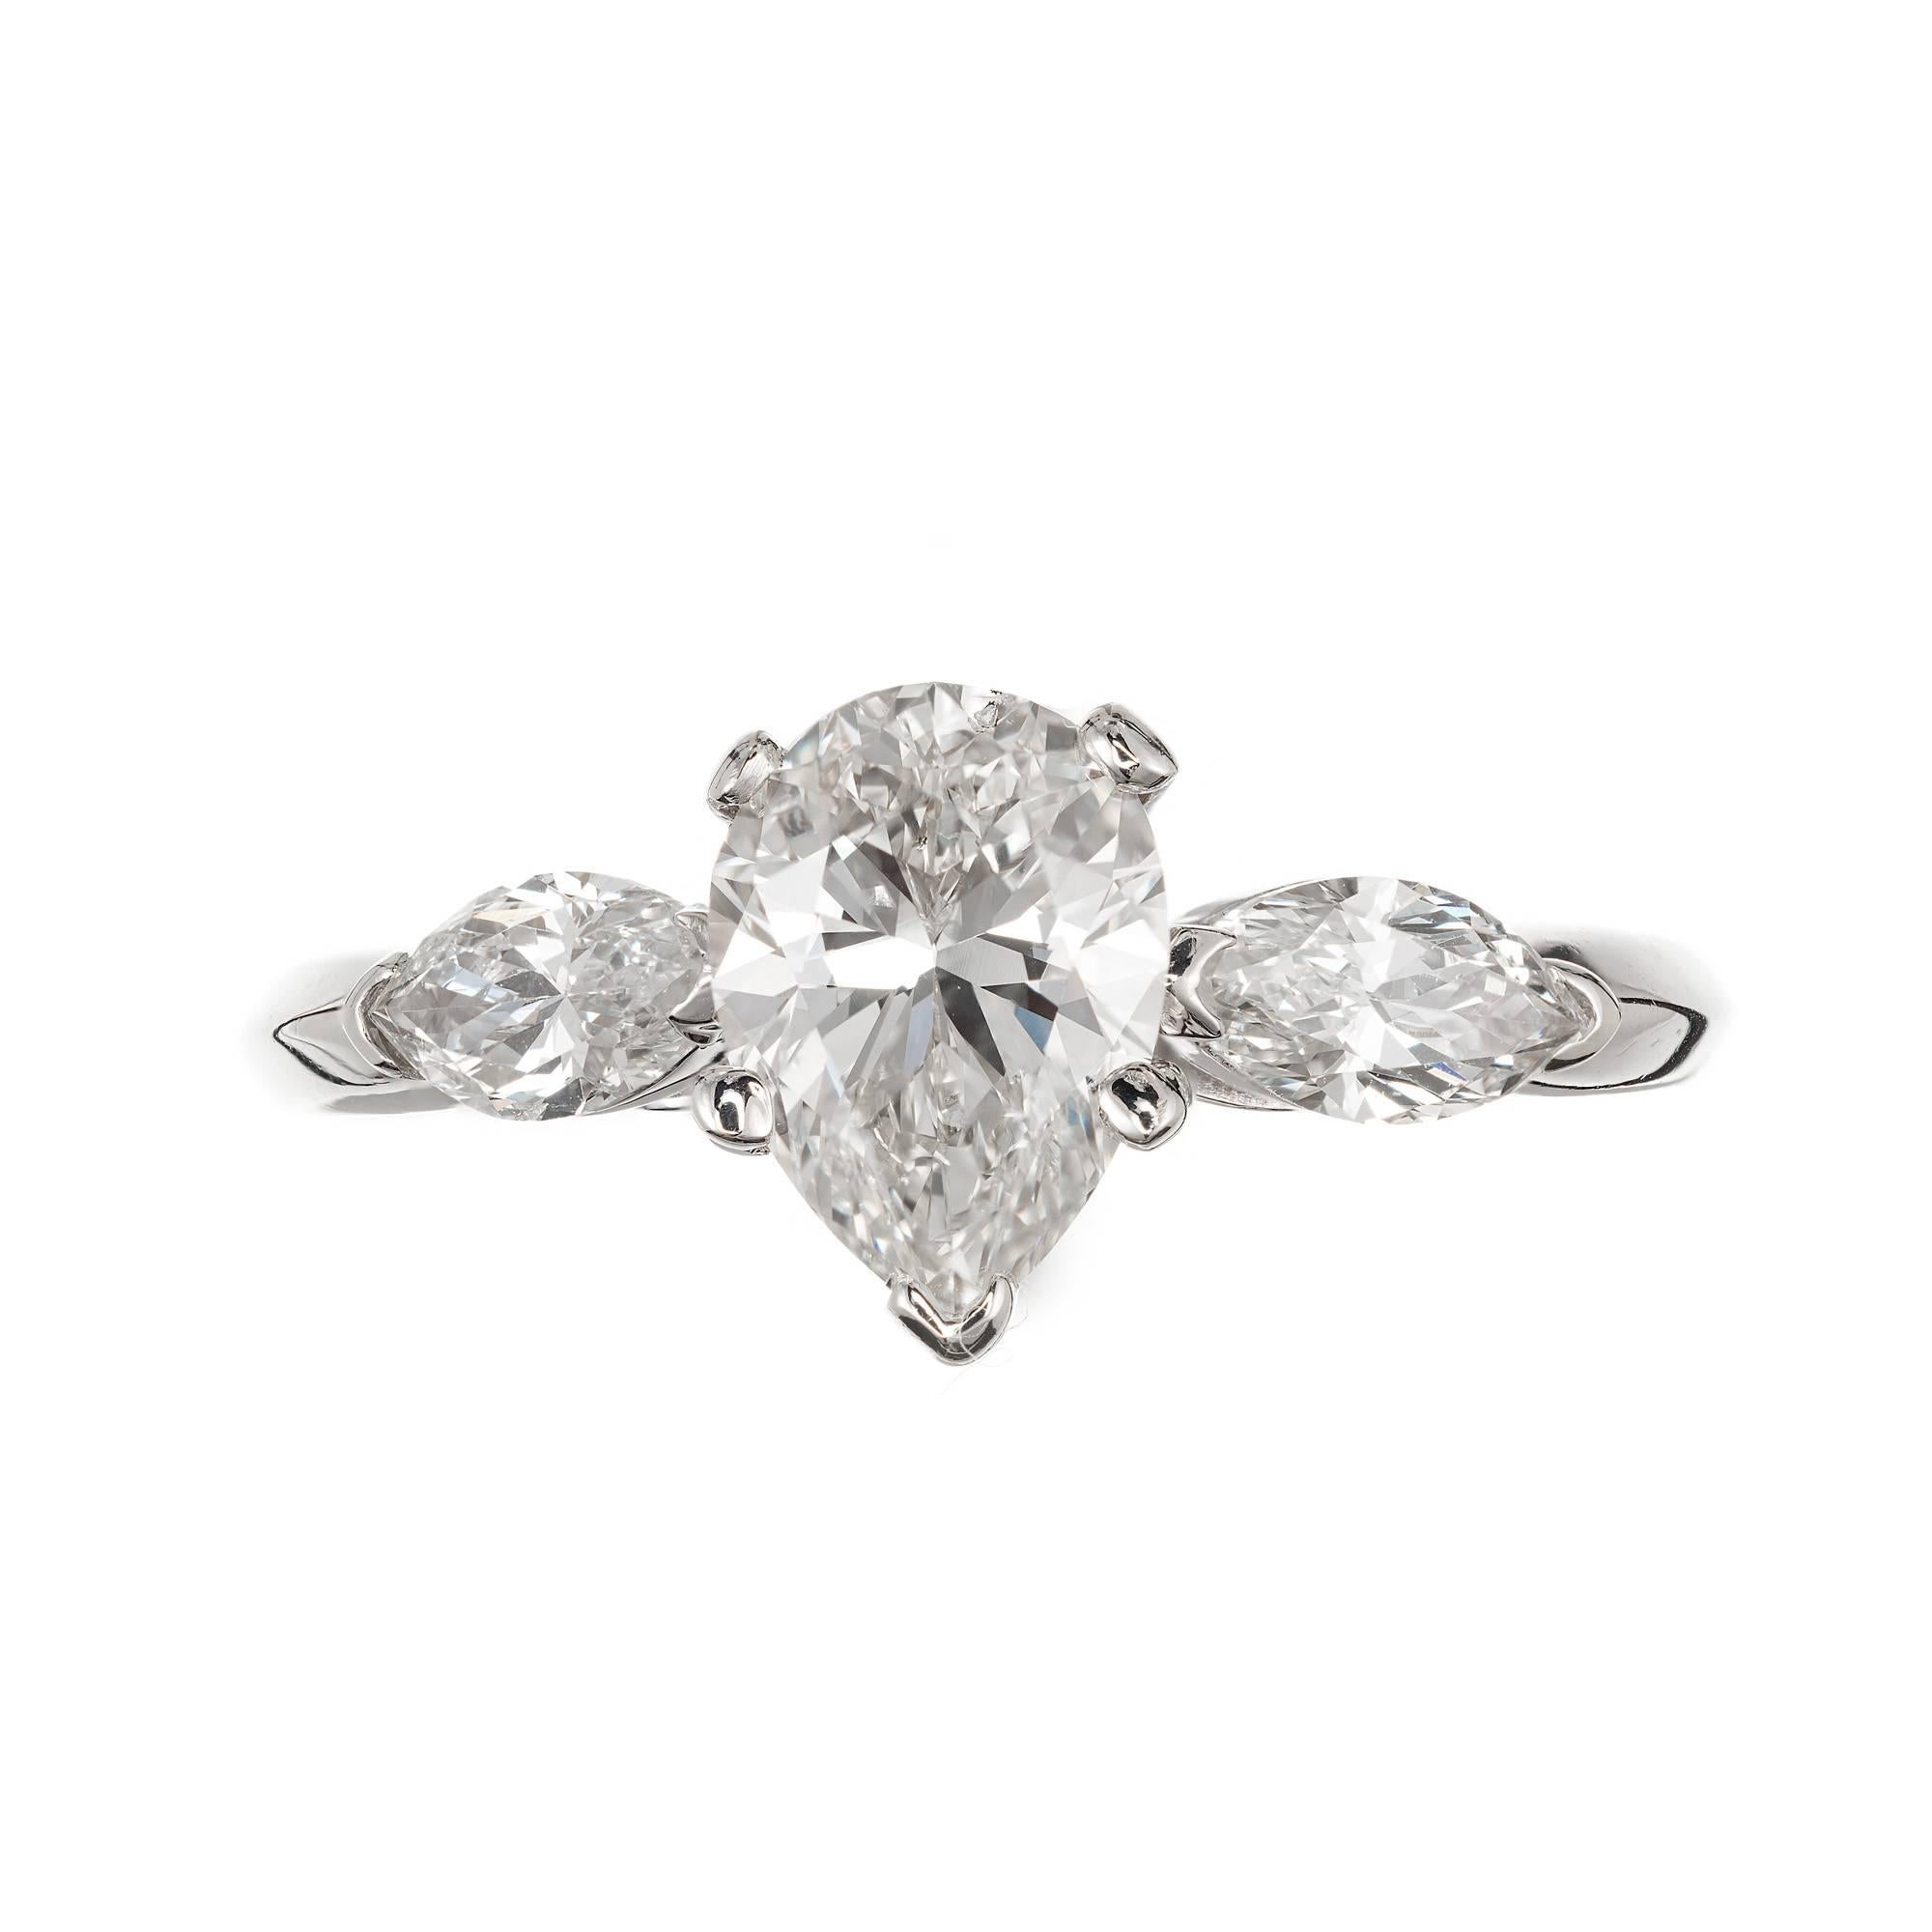 Pear shape diamond three-stone engagement ring. 14k white gold setting with tow bright white Marquise diamonds on each side of  pear shaped diamond center. Circa 1950-1959. 

1.25ct, pear brilliant cut 8.40 x 6.40 x 4.02mm K, SI1
2 Marquise cut